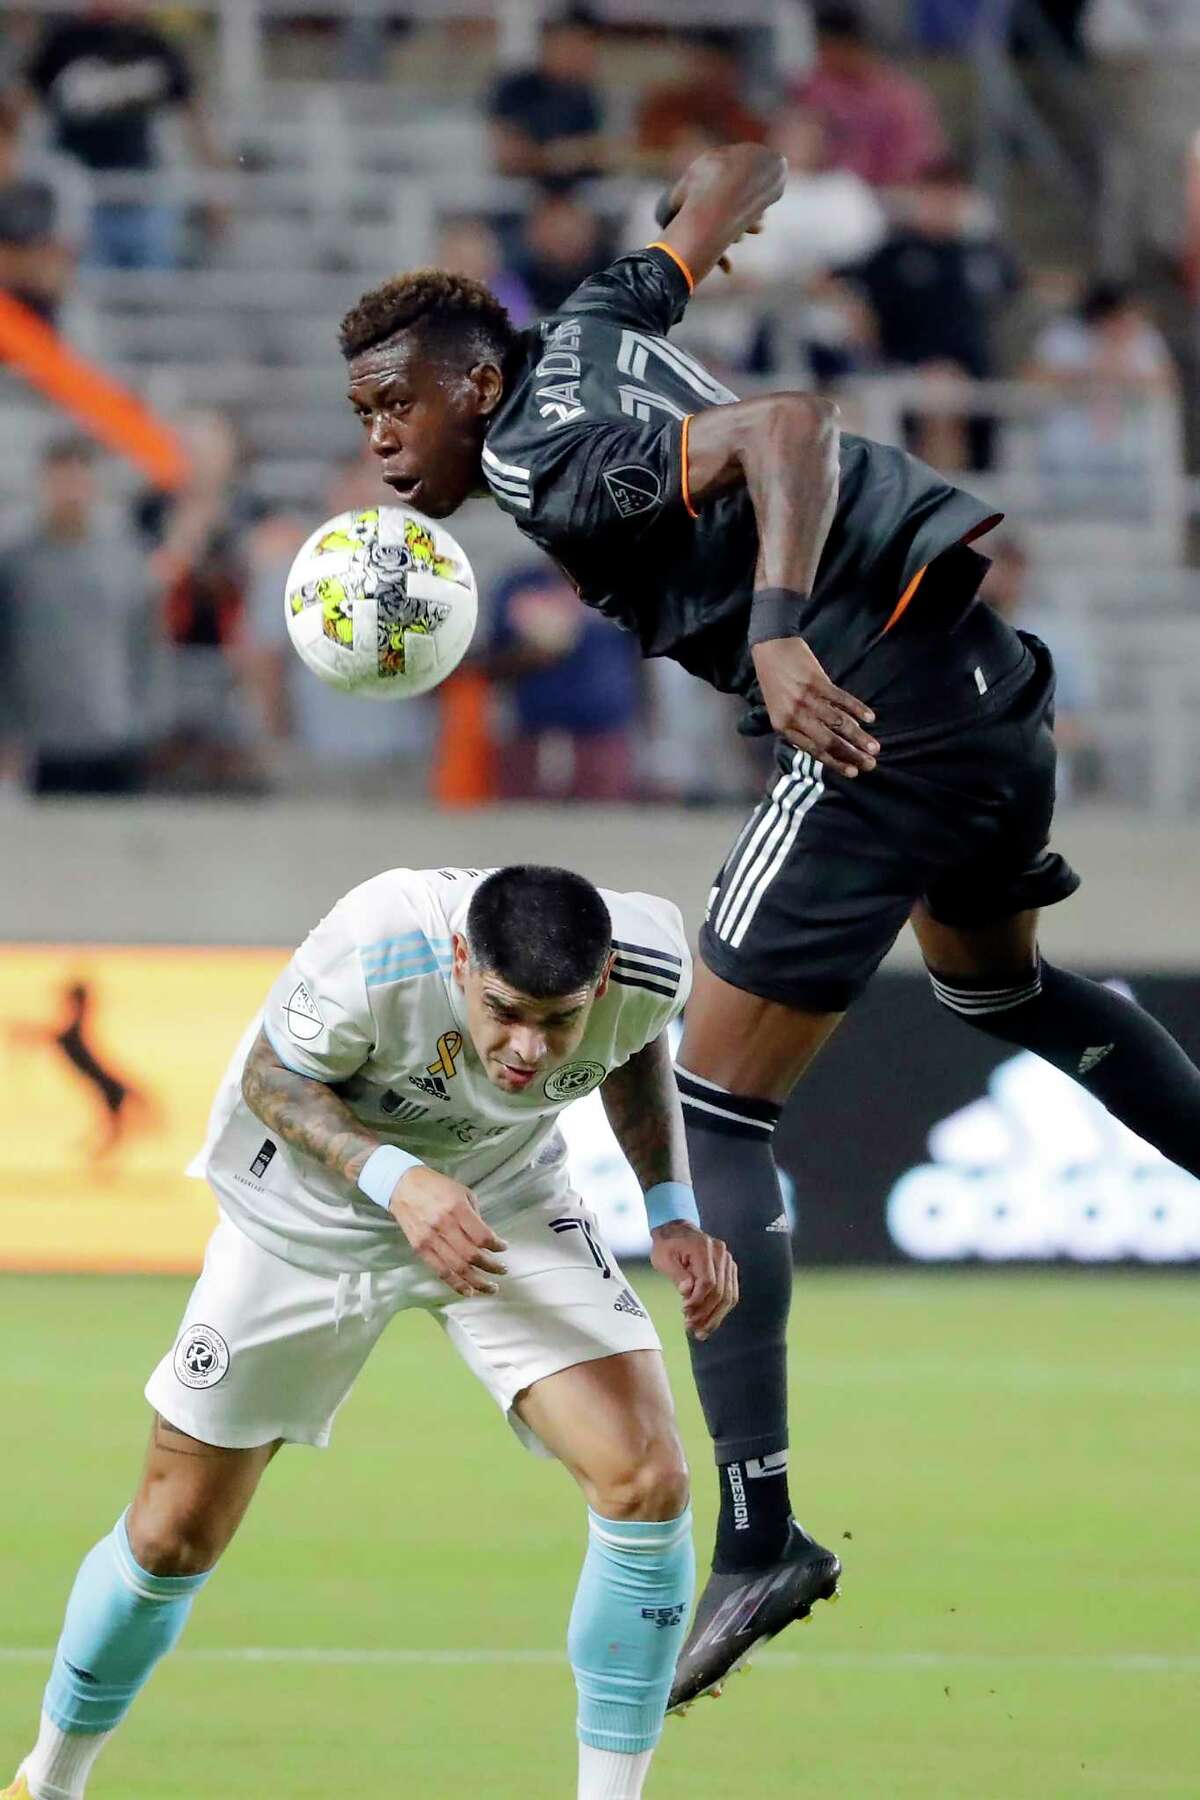 Houston Dynamo defender Teenage Hadebe, top, heads the ball over New England Revolution forward Gustavo Bou during the first half of an MLS soccer match Tuesday, Sept. 13, 2022, in Houston. (AP Photo/Michael Wyke)